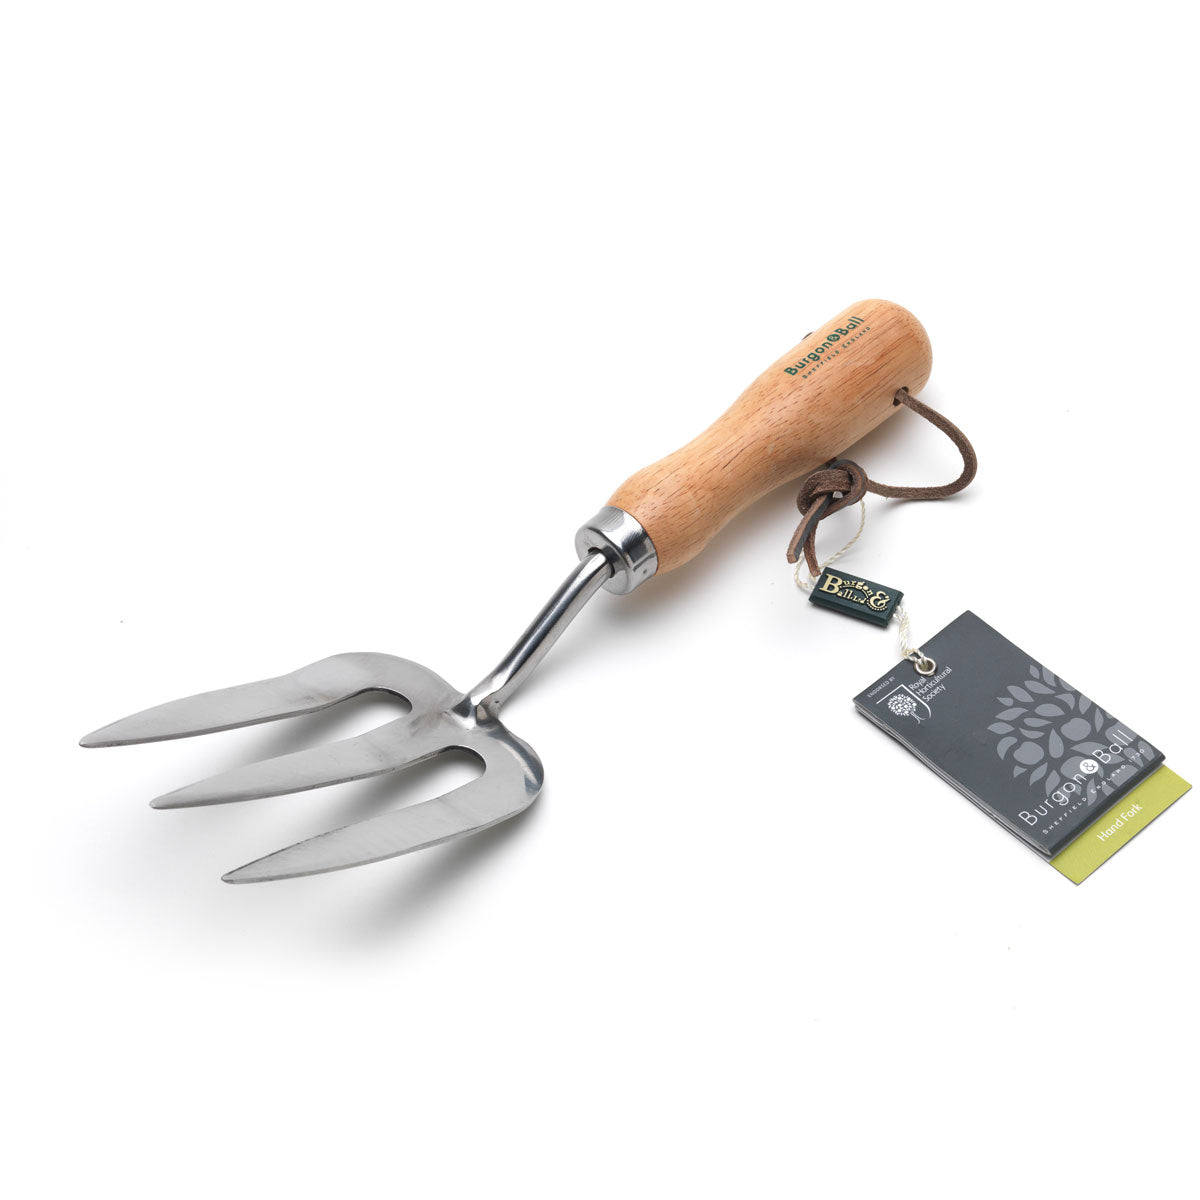 Stainless steel gardening hand fork, with wooden handle, from Burgon & Ball.